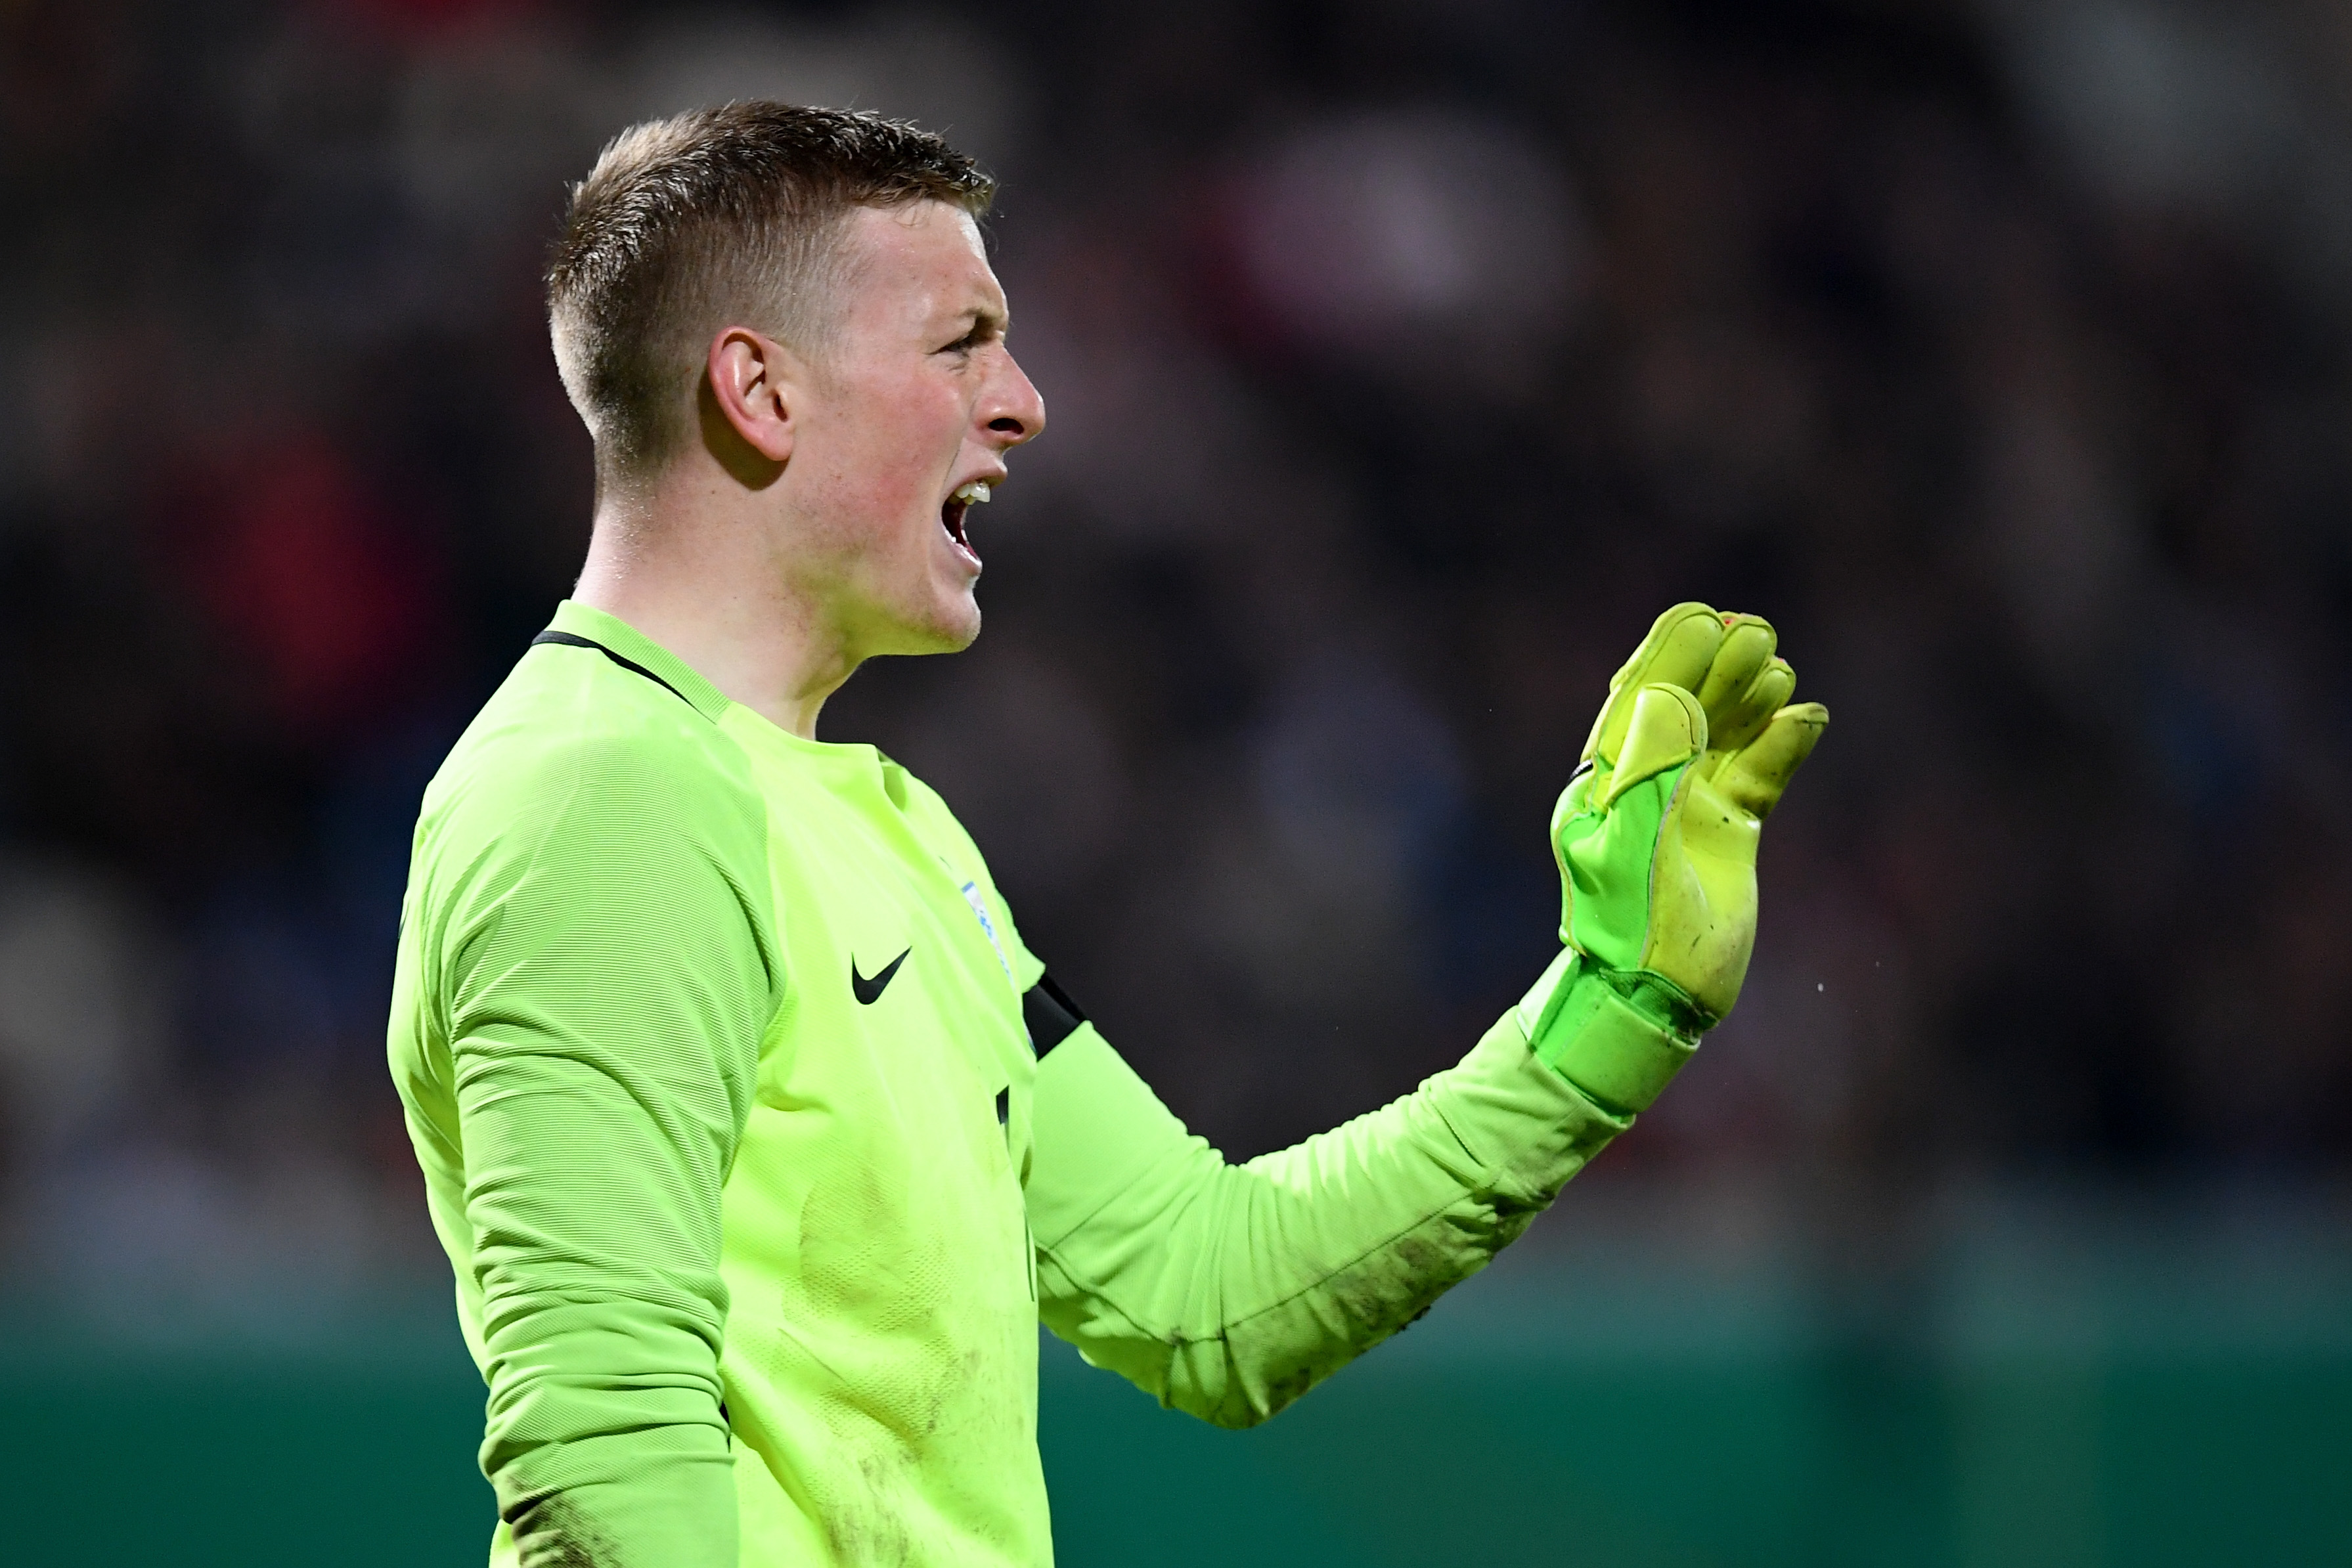 WIESBADEN, GERMANY - MARCH 24:  Jordan Pickford of England reacts during the U21 international friendly match between Germany and England at BRITA-Arena on March 24, 2017 in Wiesbaden, Germany.  (Photo by Matthias Hangst/Bongarts/Getty Images)